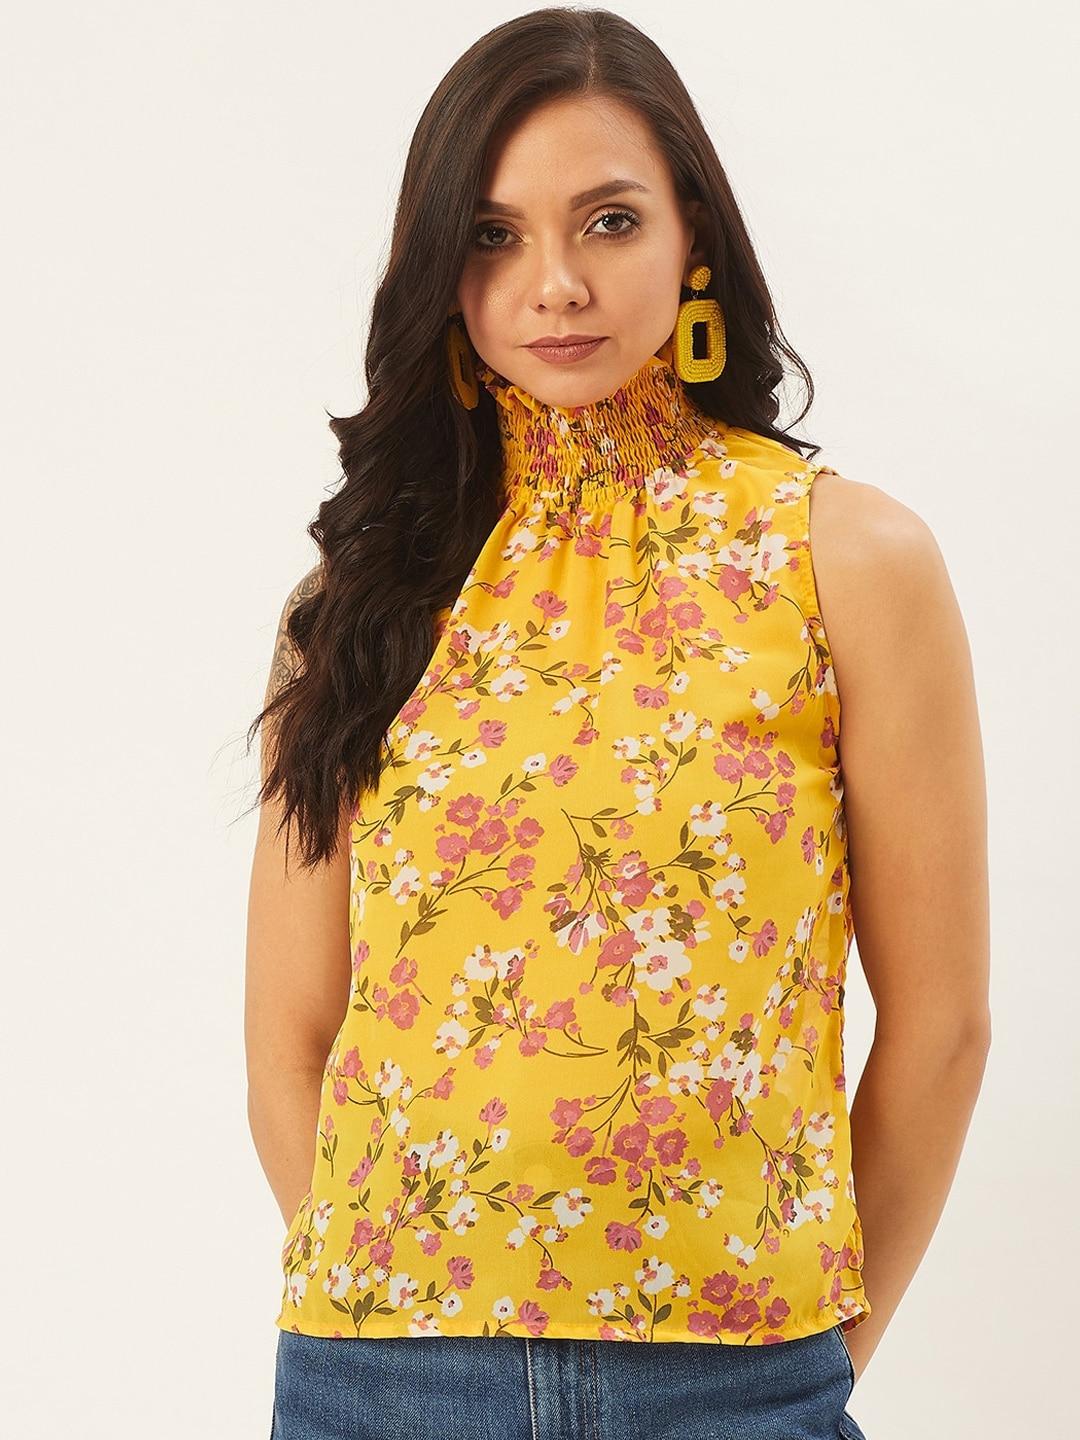 anvi-be-yourself-women-yellow-floral-printed-top